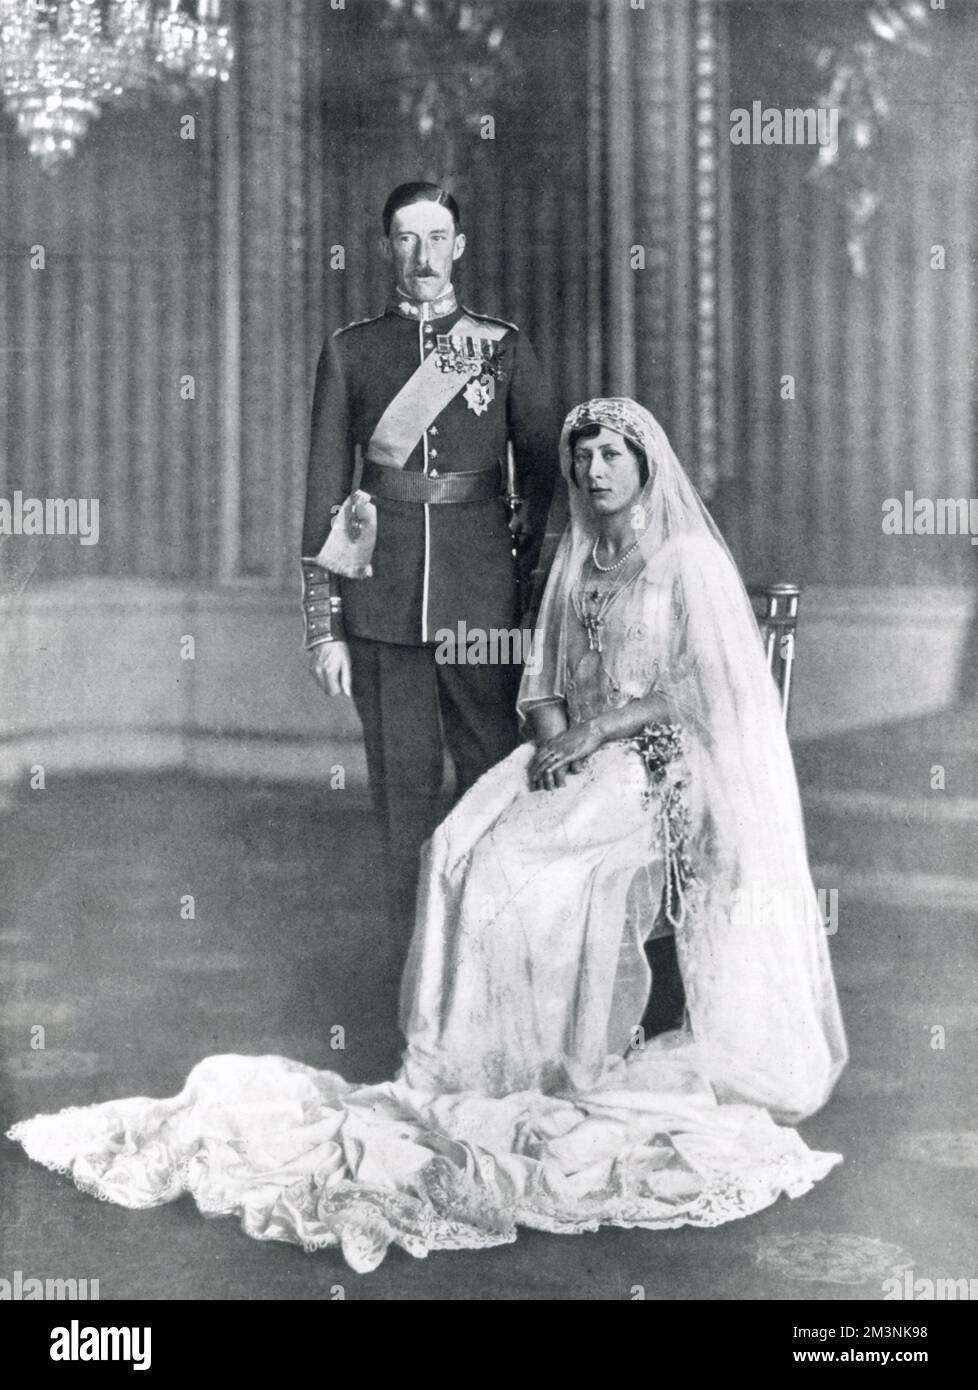 Princess Mary, daughter of King George V and Queen Mary, later the Princess Royal and Countess of Harewood, photographed with Viscount Lascelles, later the 6th Earl of Harewood, at Buckingham Palace immediately after their wedding on 28th February 1922. Lord Lascelles is wearing the ribbon of the Order of the Garter over his Guards uniform.     Date: 1922 Stock Photo